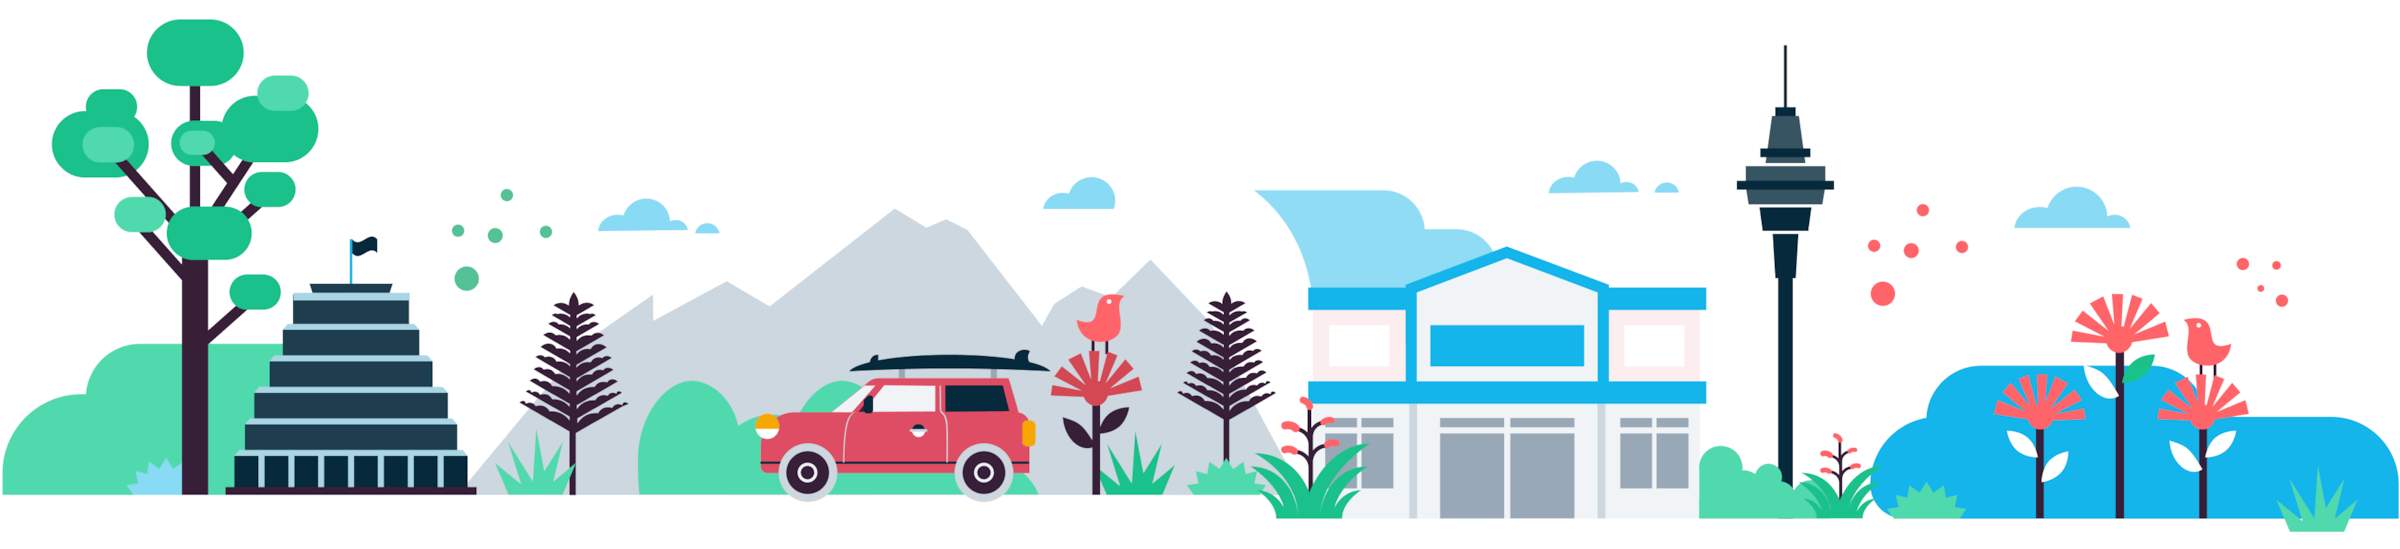 A header image for Xero’s headquarters in New Zealand shows some of Wellington’s best-known landmarks and attractions.